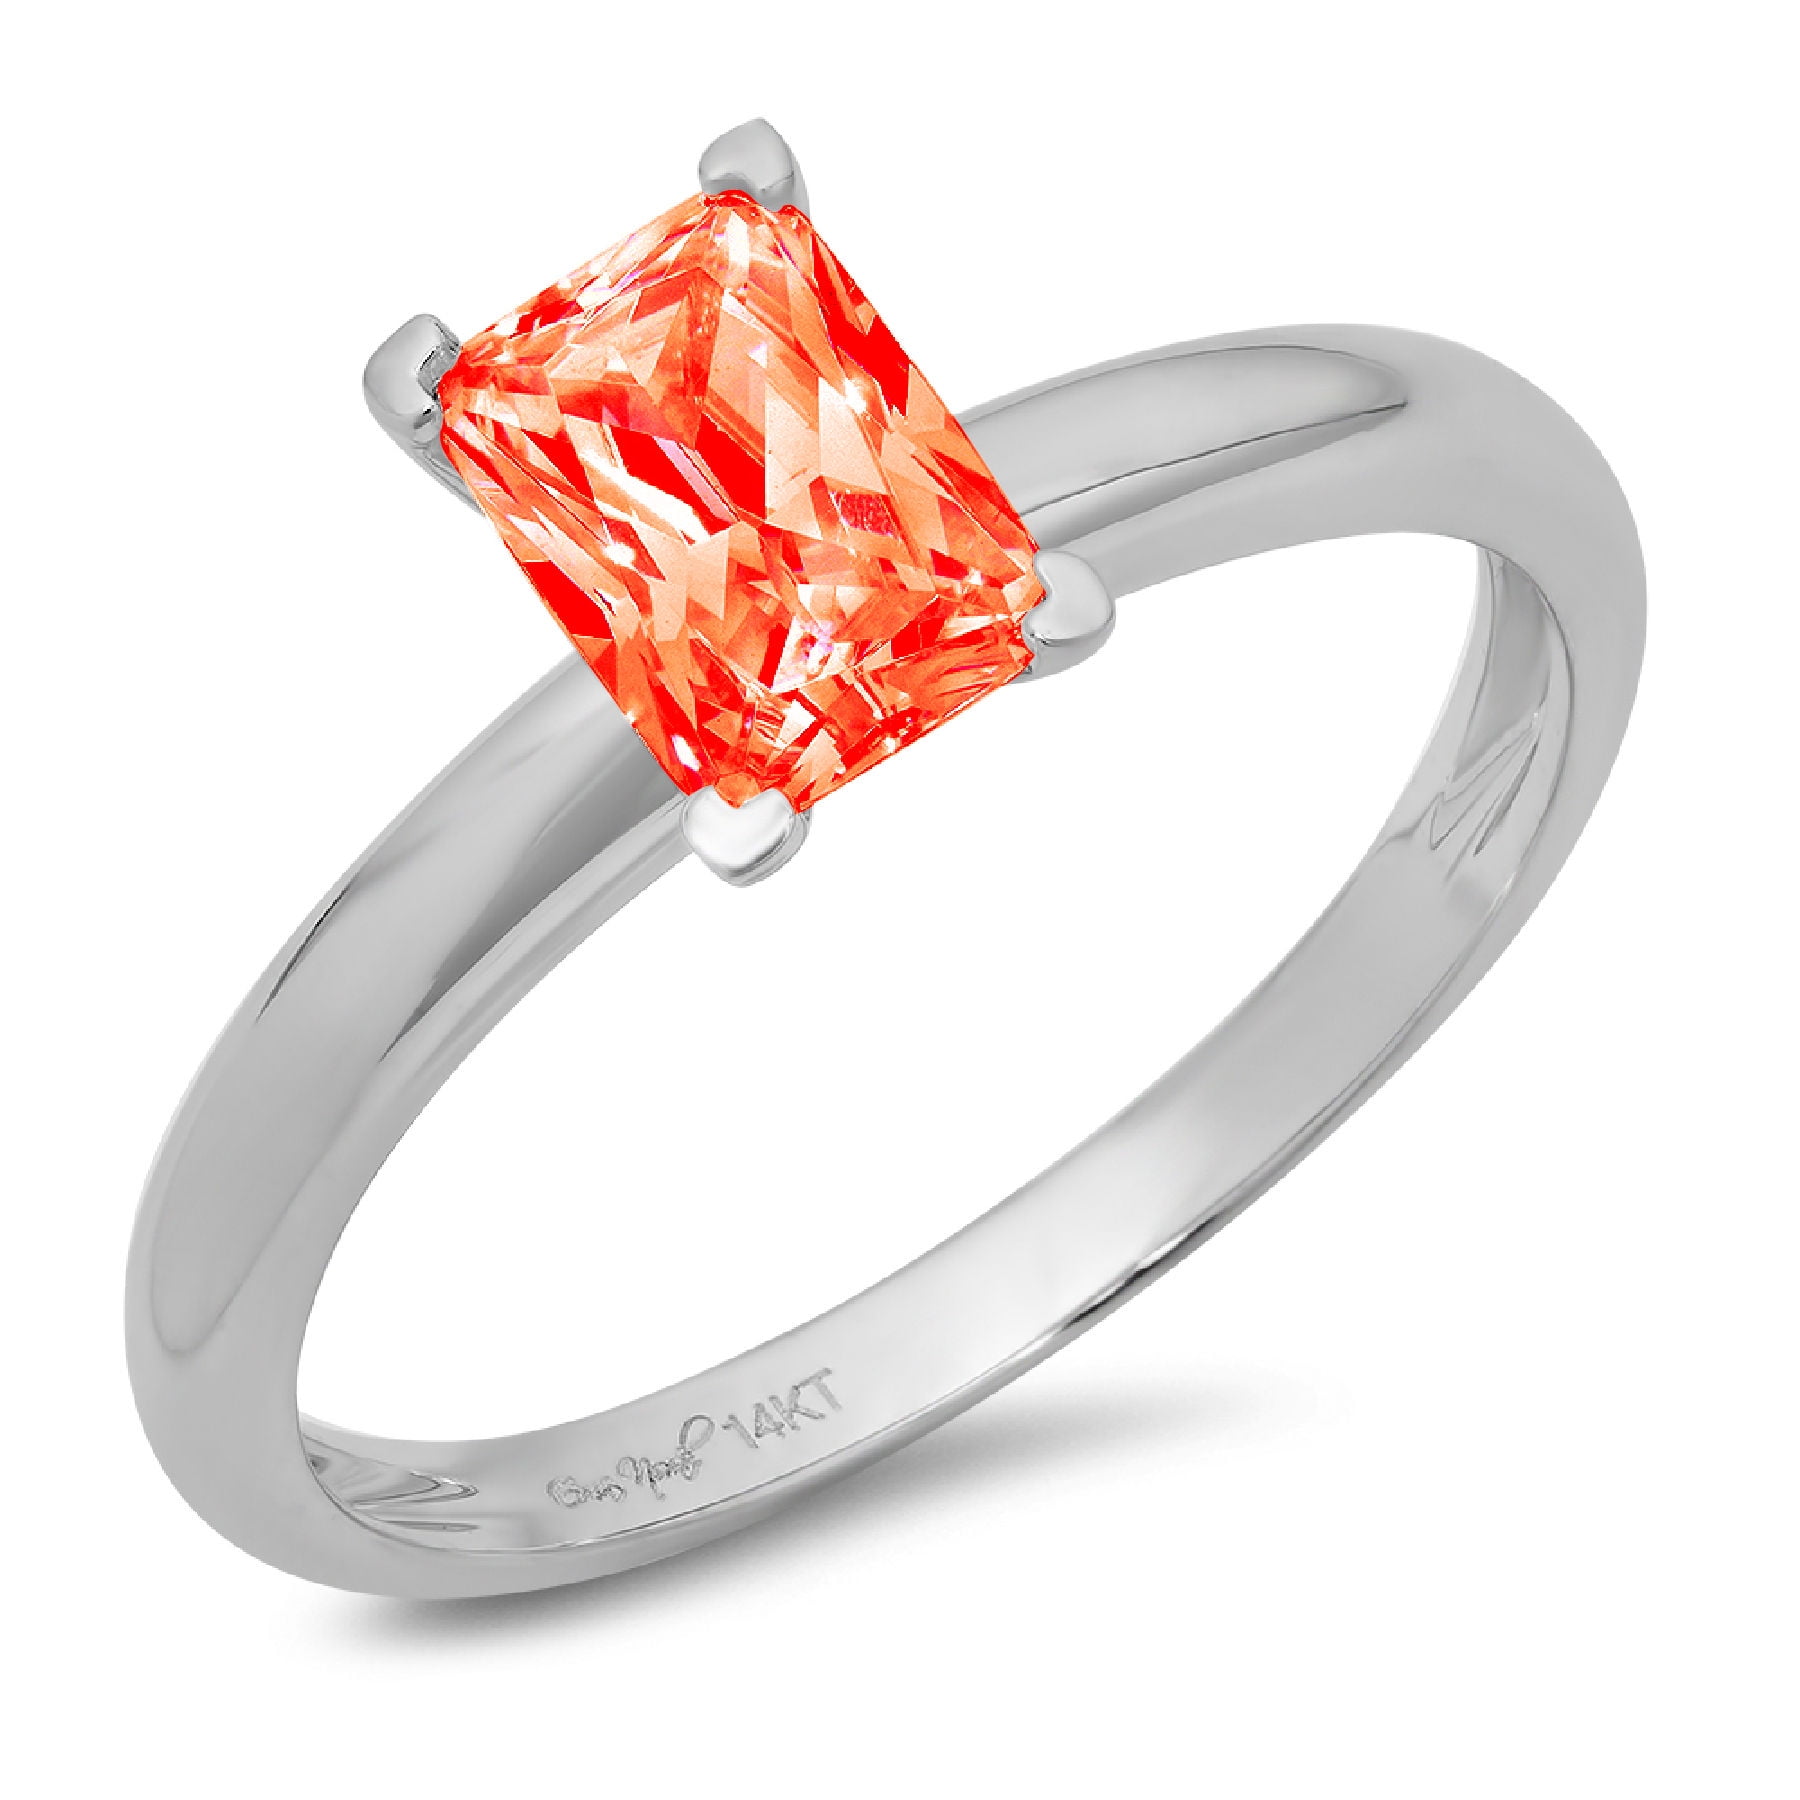 Details about   1 Ct Princess Cut Pink July Birthstone Three Stones Ring 14K White Gold Plated 